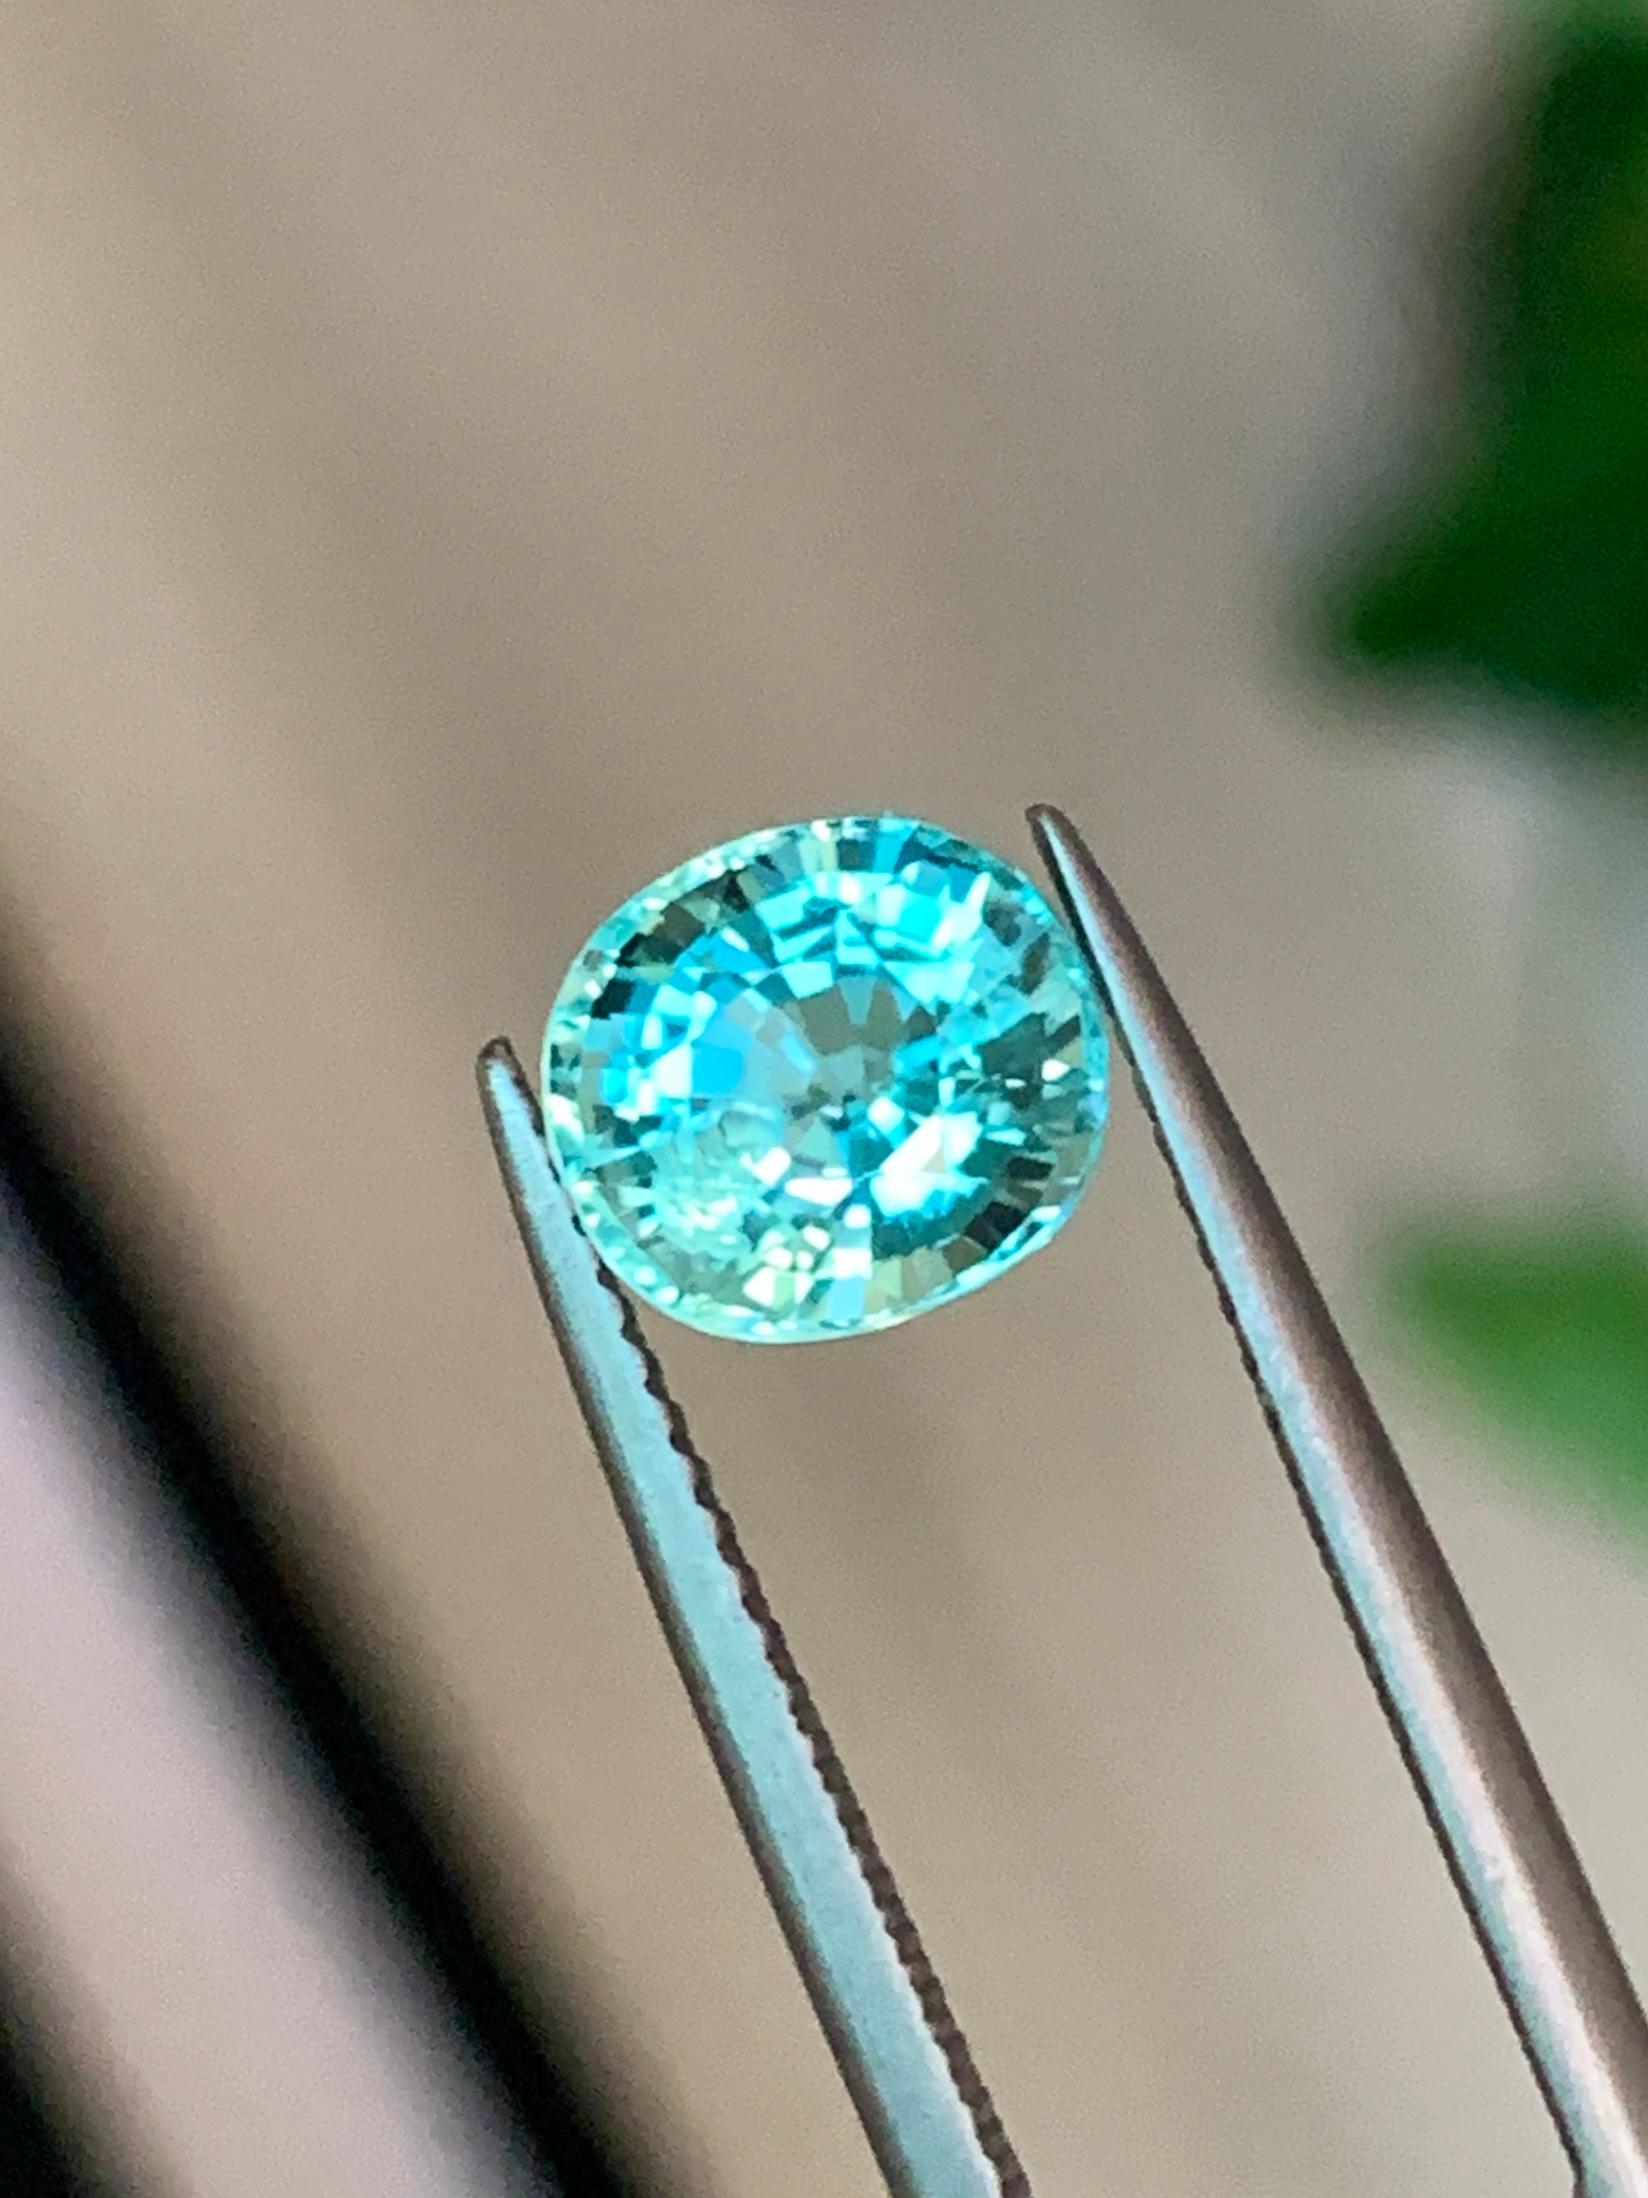 ITEM DESCRIPTION: 
Gem type : Tourmaline Paraiba
Origin: Mozambique
Treatment: Heated
Color: Blue-Green
shape: Oval
Size: 2.26 Carats

 Paraiba tourmaline is a rare and highly prized gemstone known for its vivid neon blue to greenish-blue hues. It